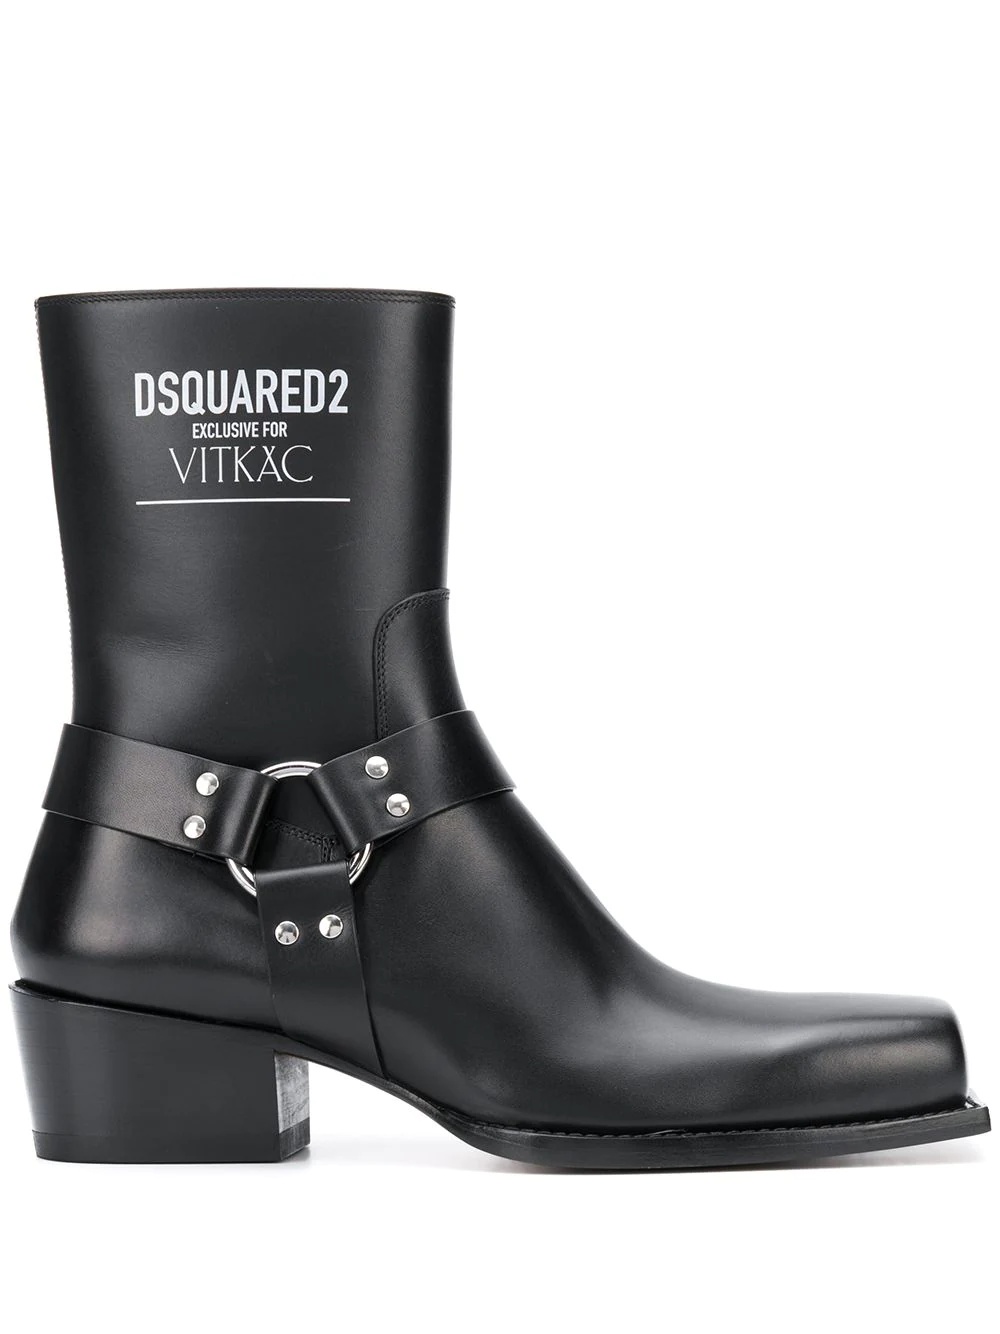 Exclusive for Vitkac ankle boots - 1